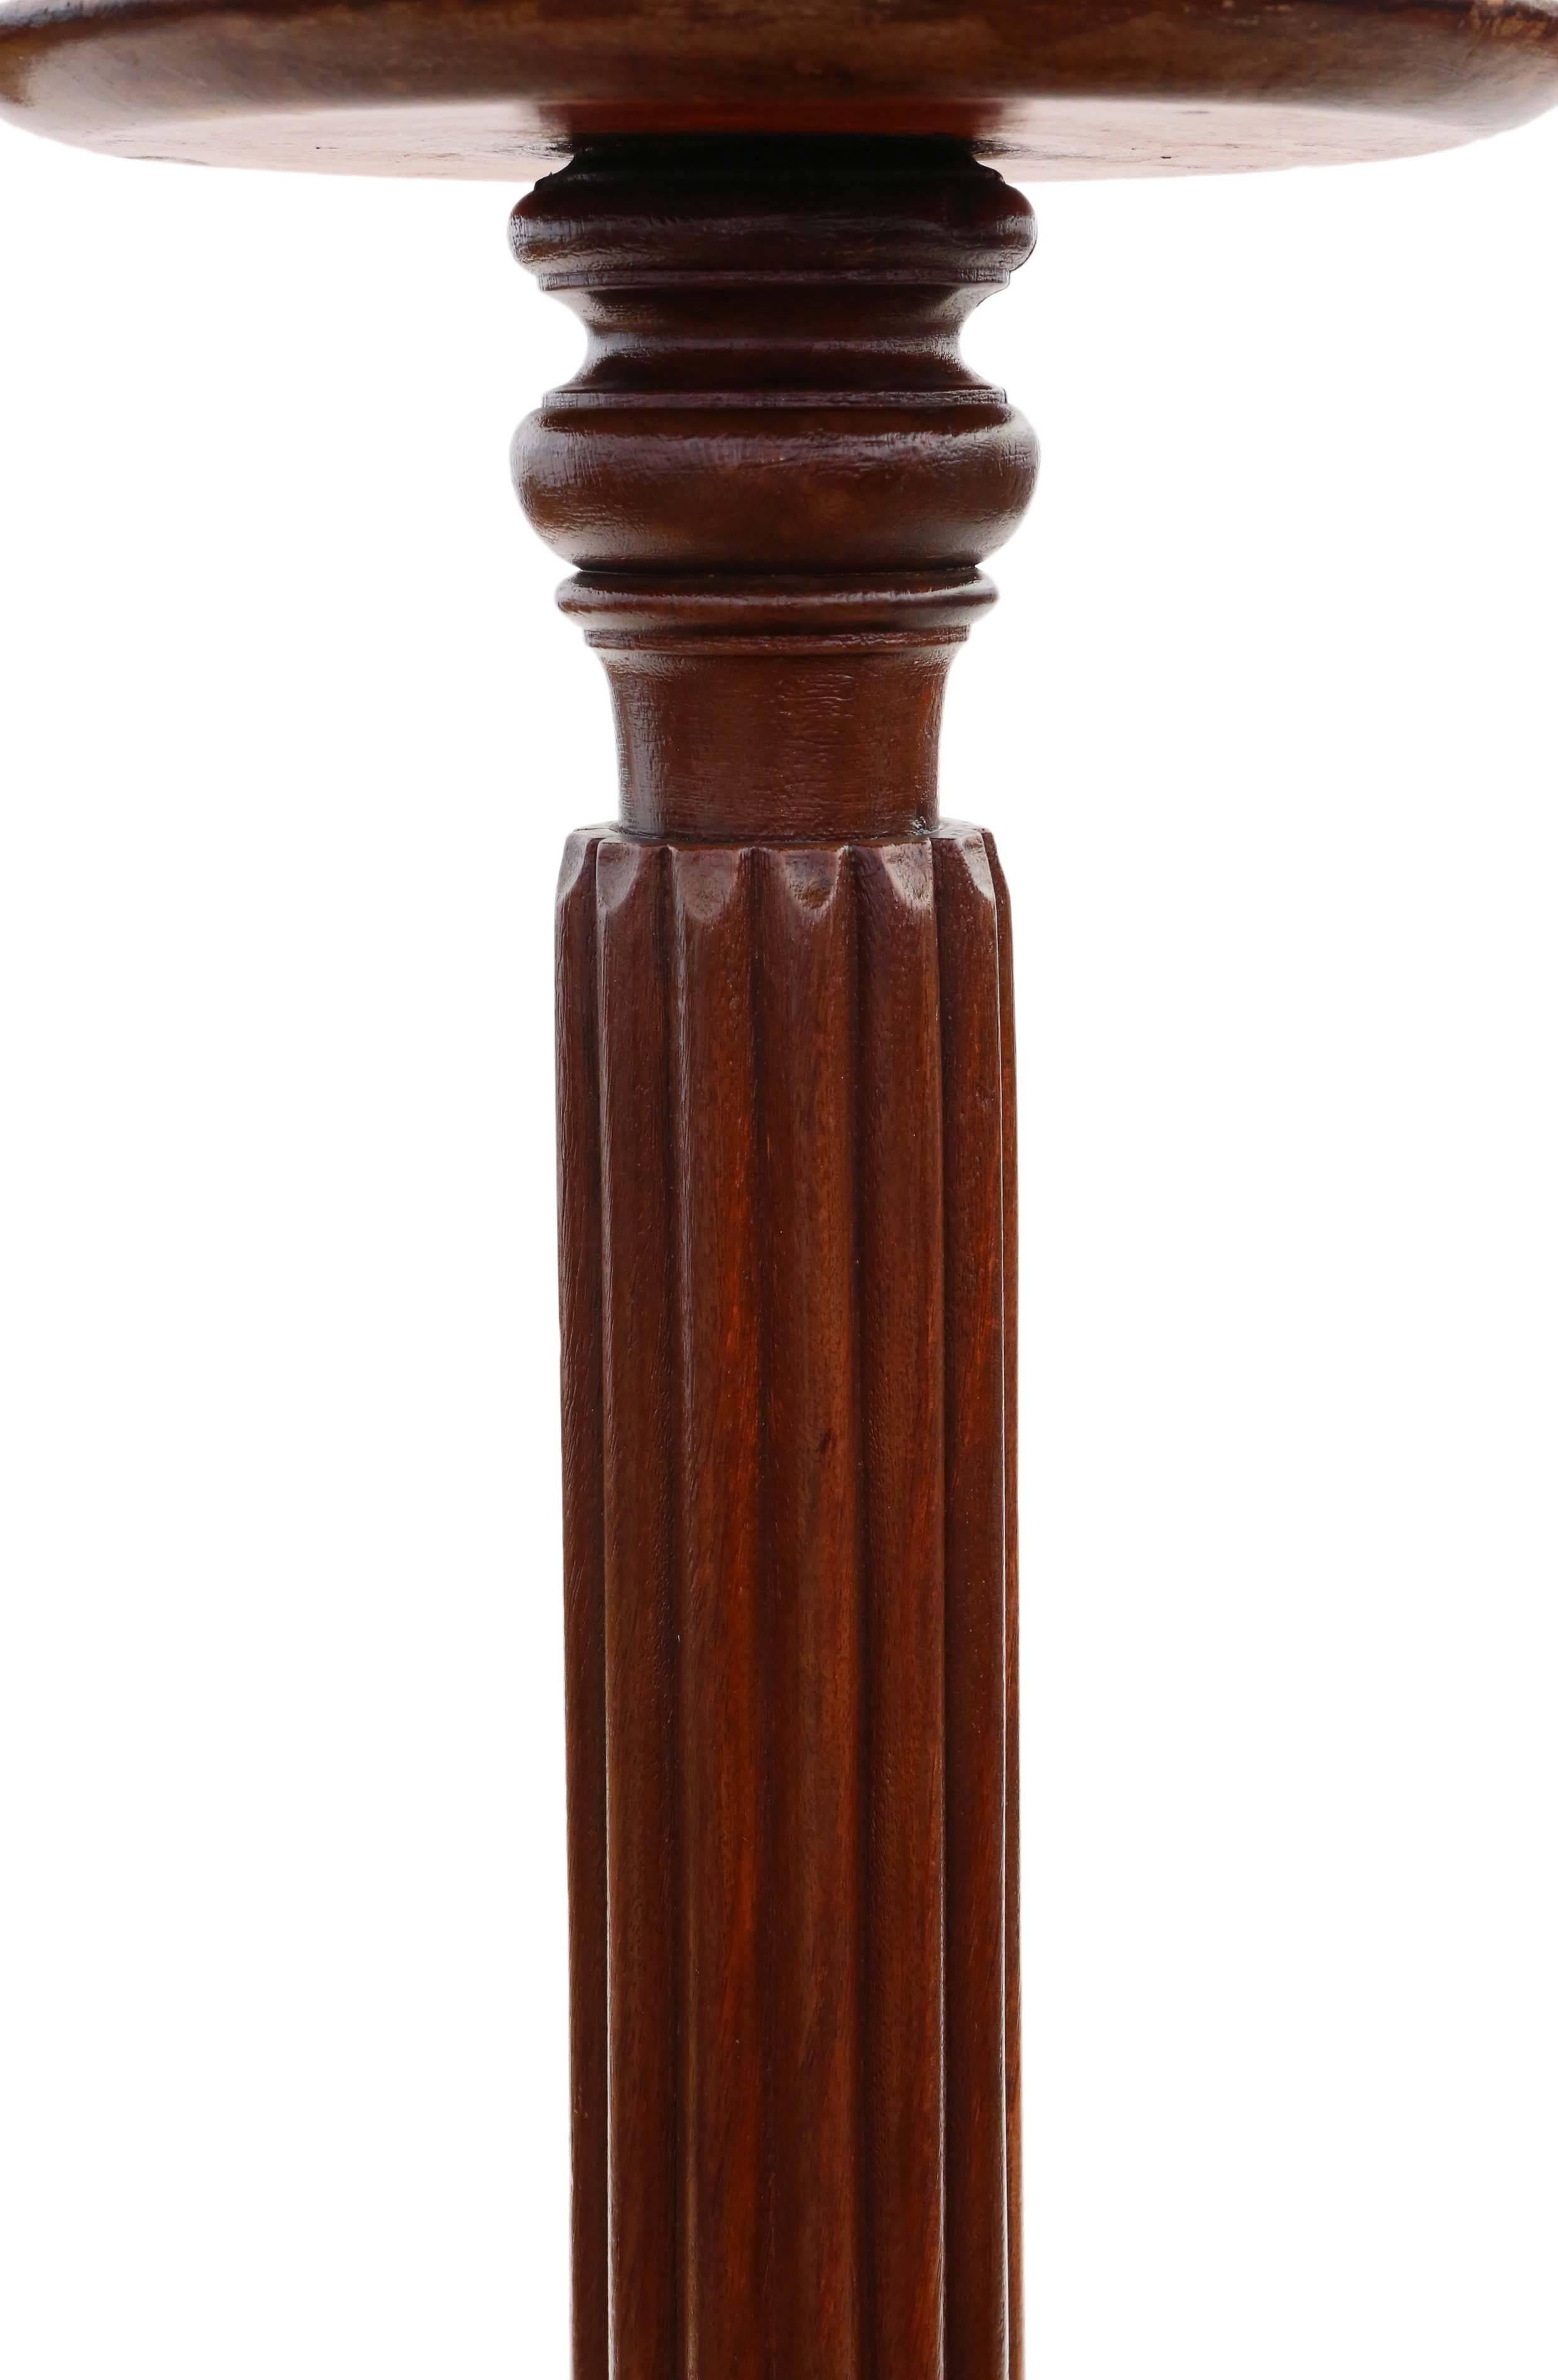 Antique Victorian mahogany torchiere jardiniere stand pedestal plant table.

This item is fine quality, solid and heavy, with no loose joints. Very stable.

No woodworm.

An attractive piece with a lovely melon fluted stem and a quality